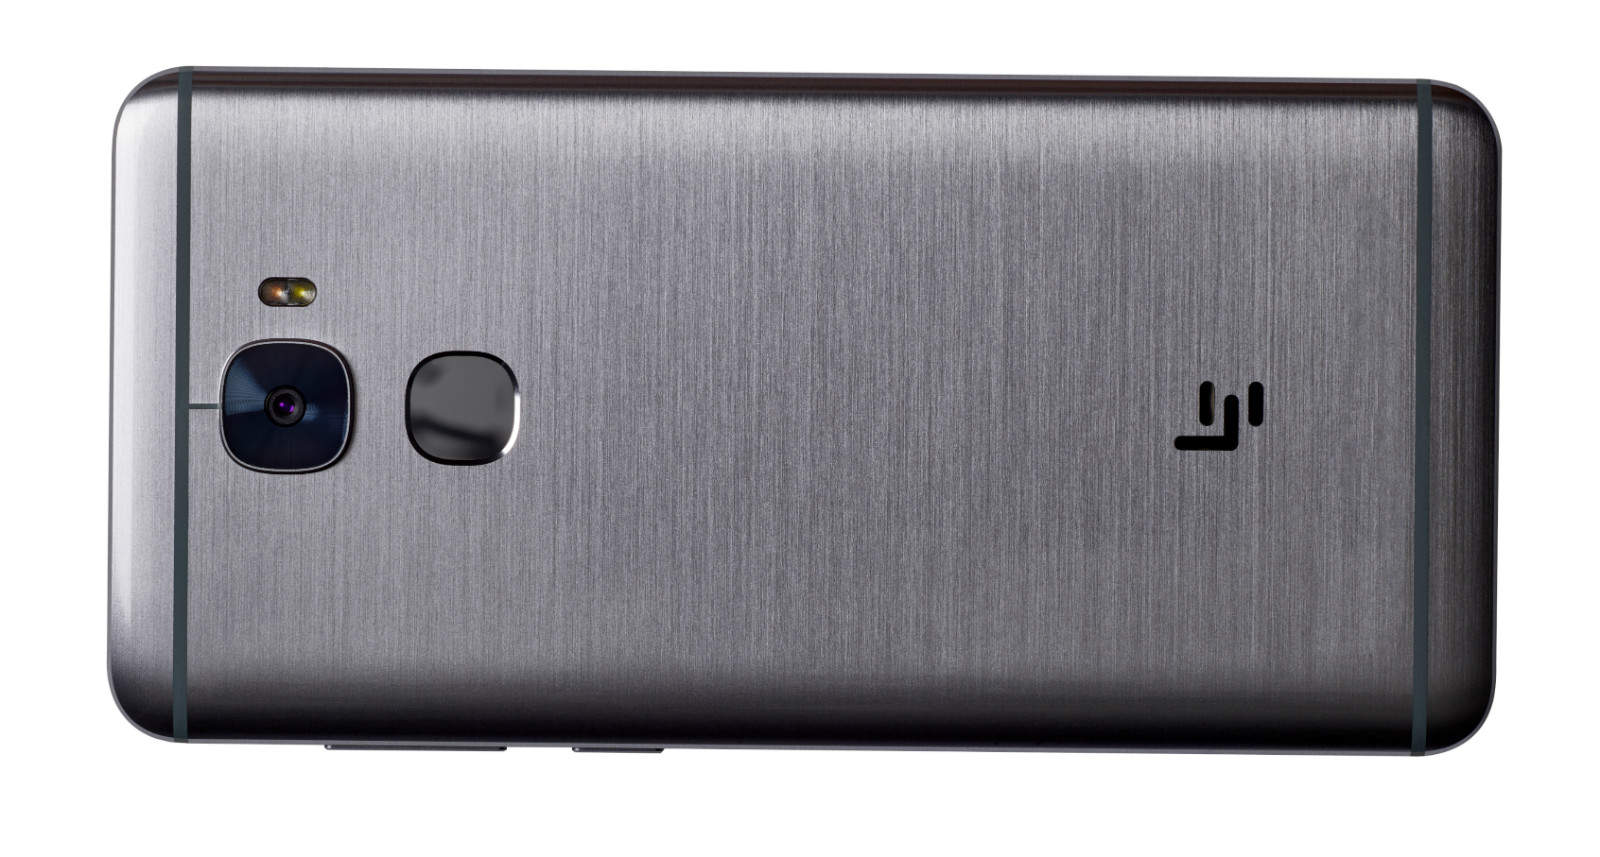 The LePro3 comes packs powerhouse features into a brushed-aluminum body.